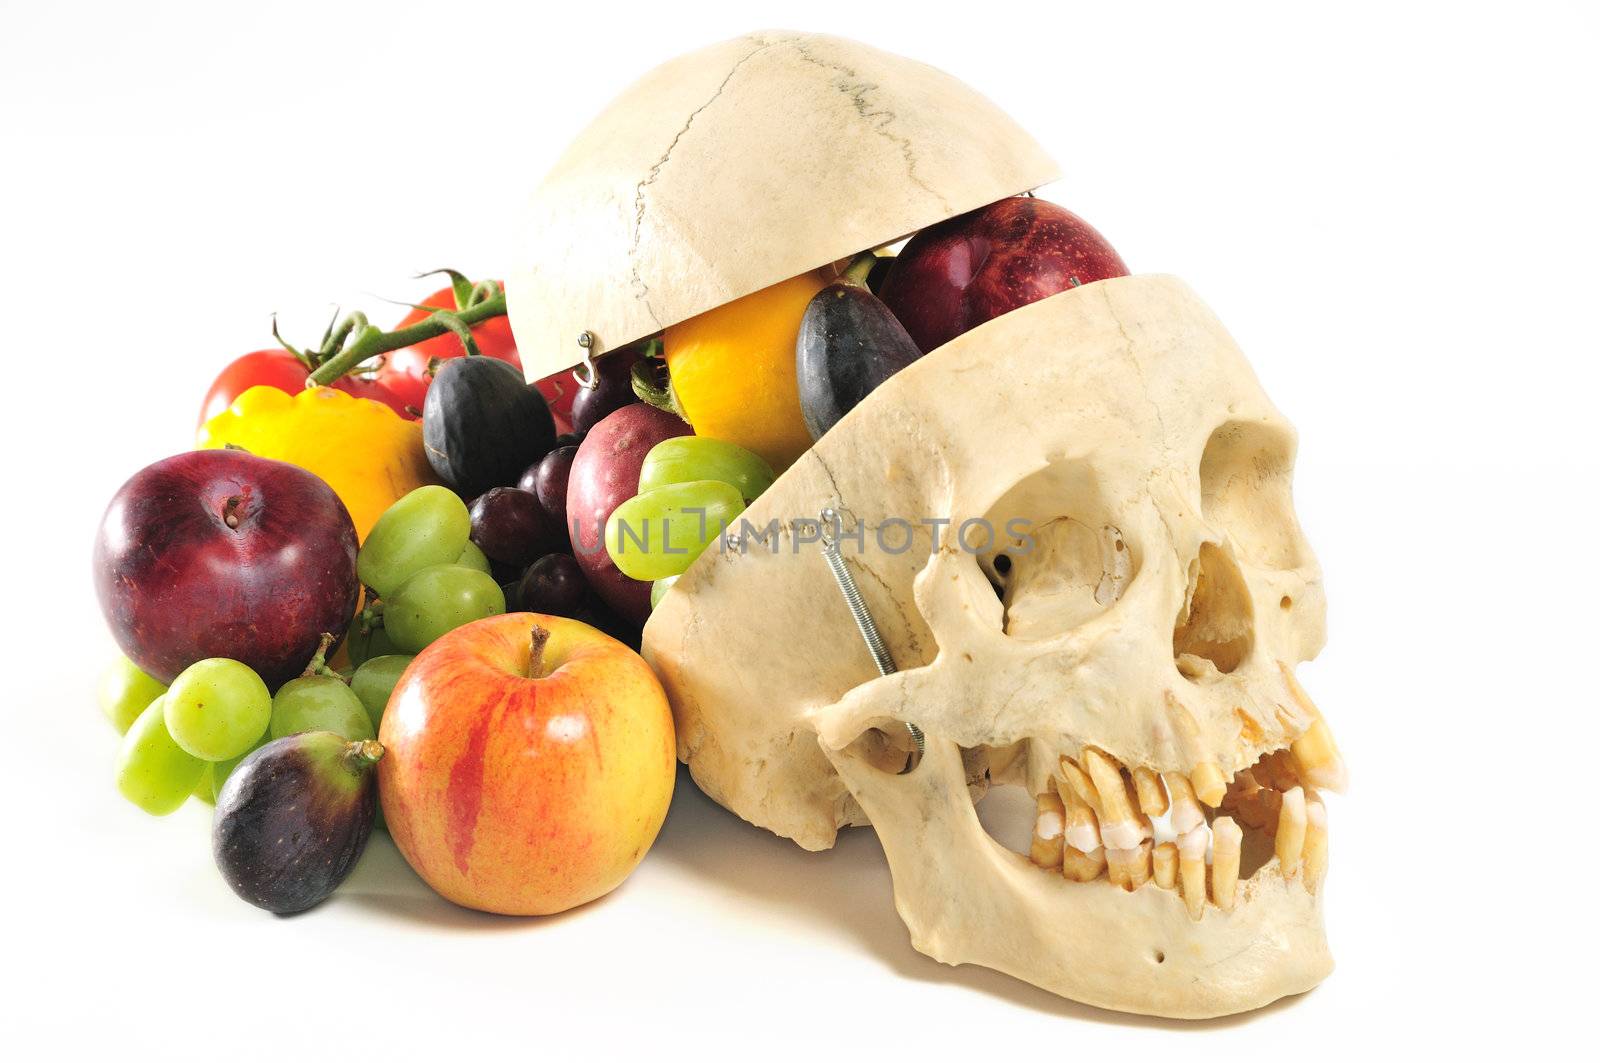 A human skull with skullcap overflowing with fruits and vegetables.